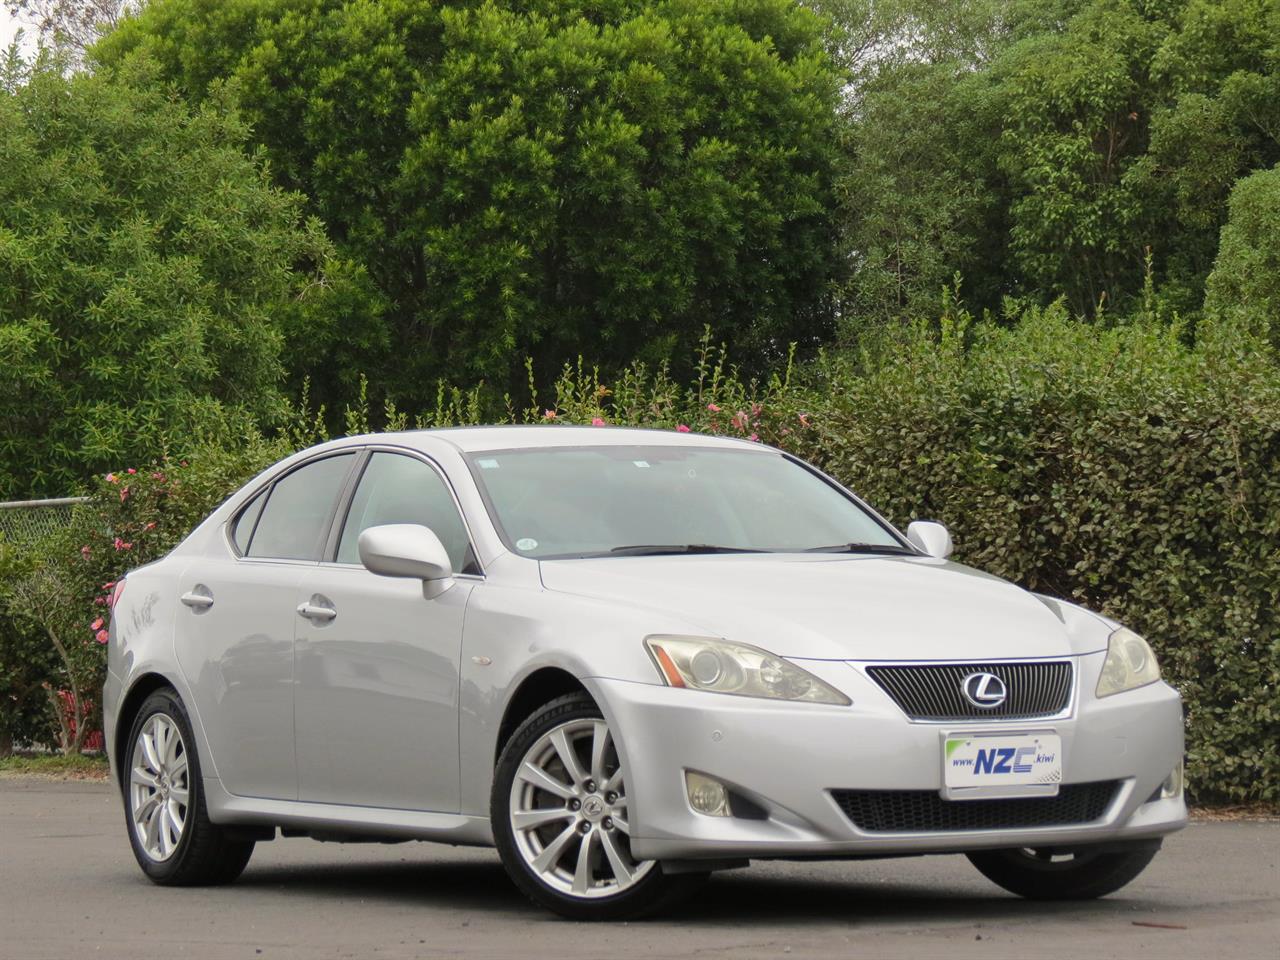 NZC 2008 Lexus IS 350 just arrived to Auckland